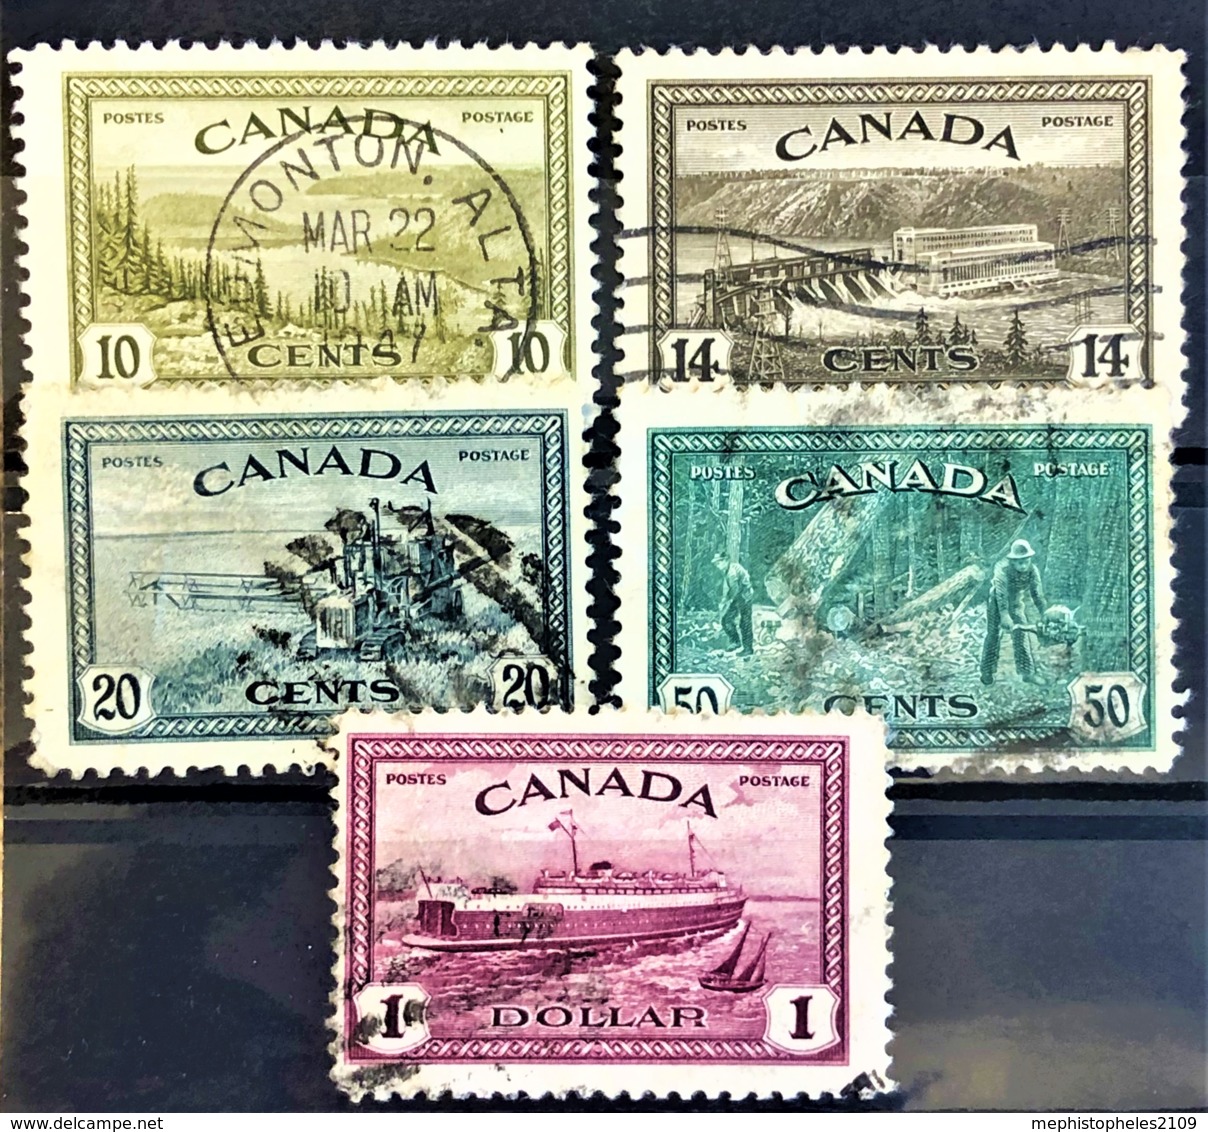 CANADA 1946 - Canceled - Sc# 269, 270, 271, 272, 273 - Used Stamps